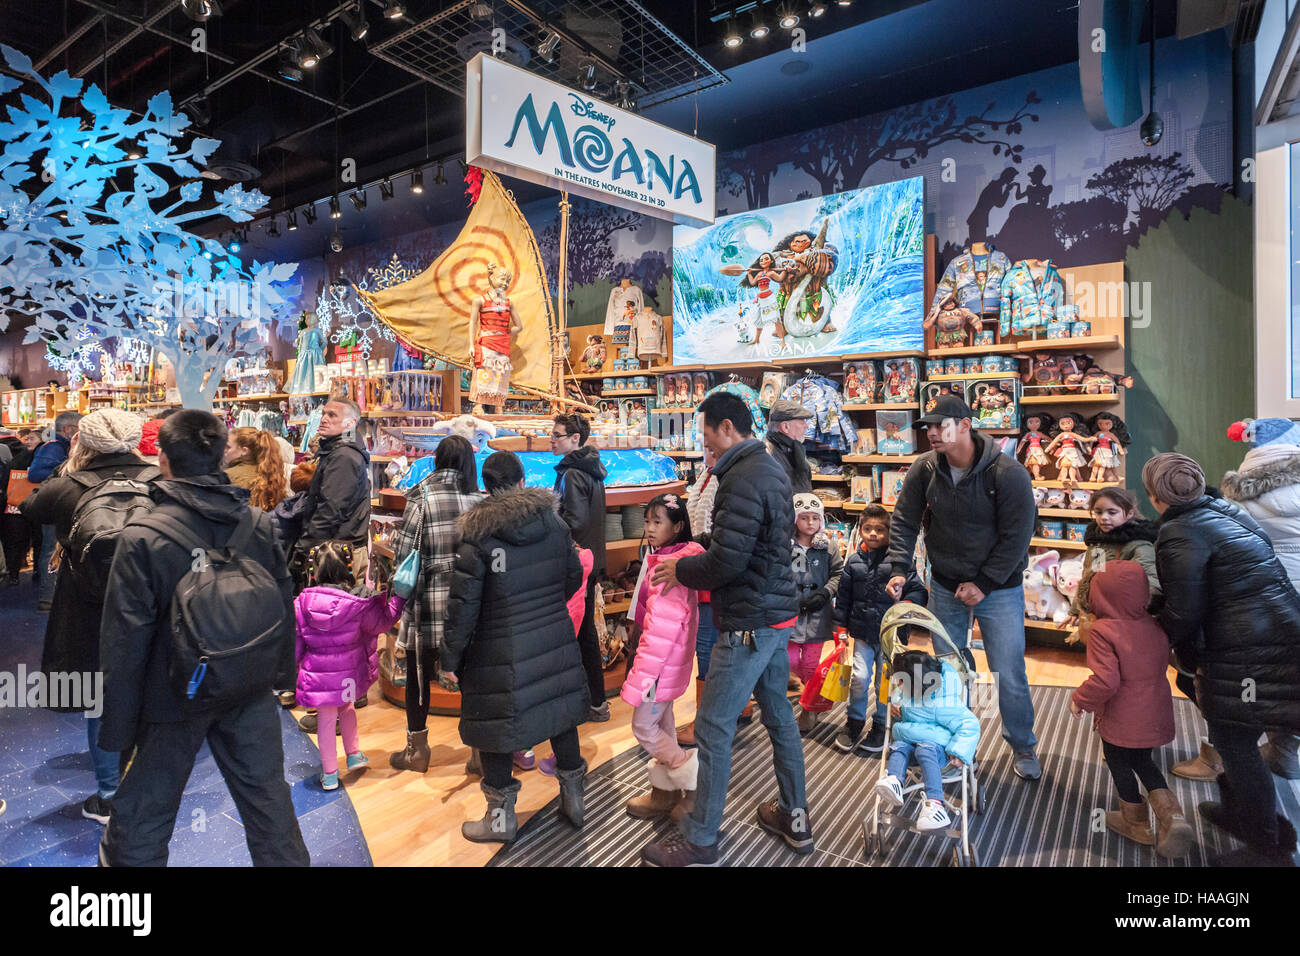 The Disney Store in Times Square in New York promotes merchandise tied to its latest release, 'Moana', seen on Saturday, November 26, 2016. Playing in 3875 locations 'Moana' appears to be the winner of the Thanksgiving movie sweepstakes already earning $21.8 million with an estimate of over $80 million by the time the holiday weekend ends. And that's just box office, it doesn't include the obligatory merchandising that goes along.  (© Richard B. Levine) Stock Photo